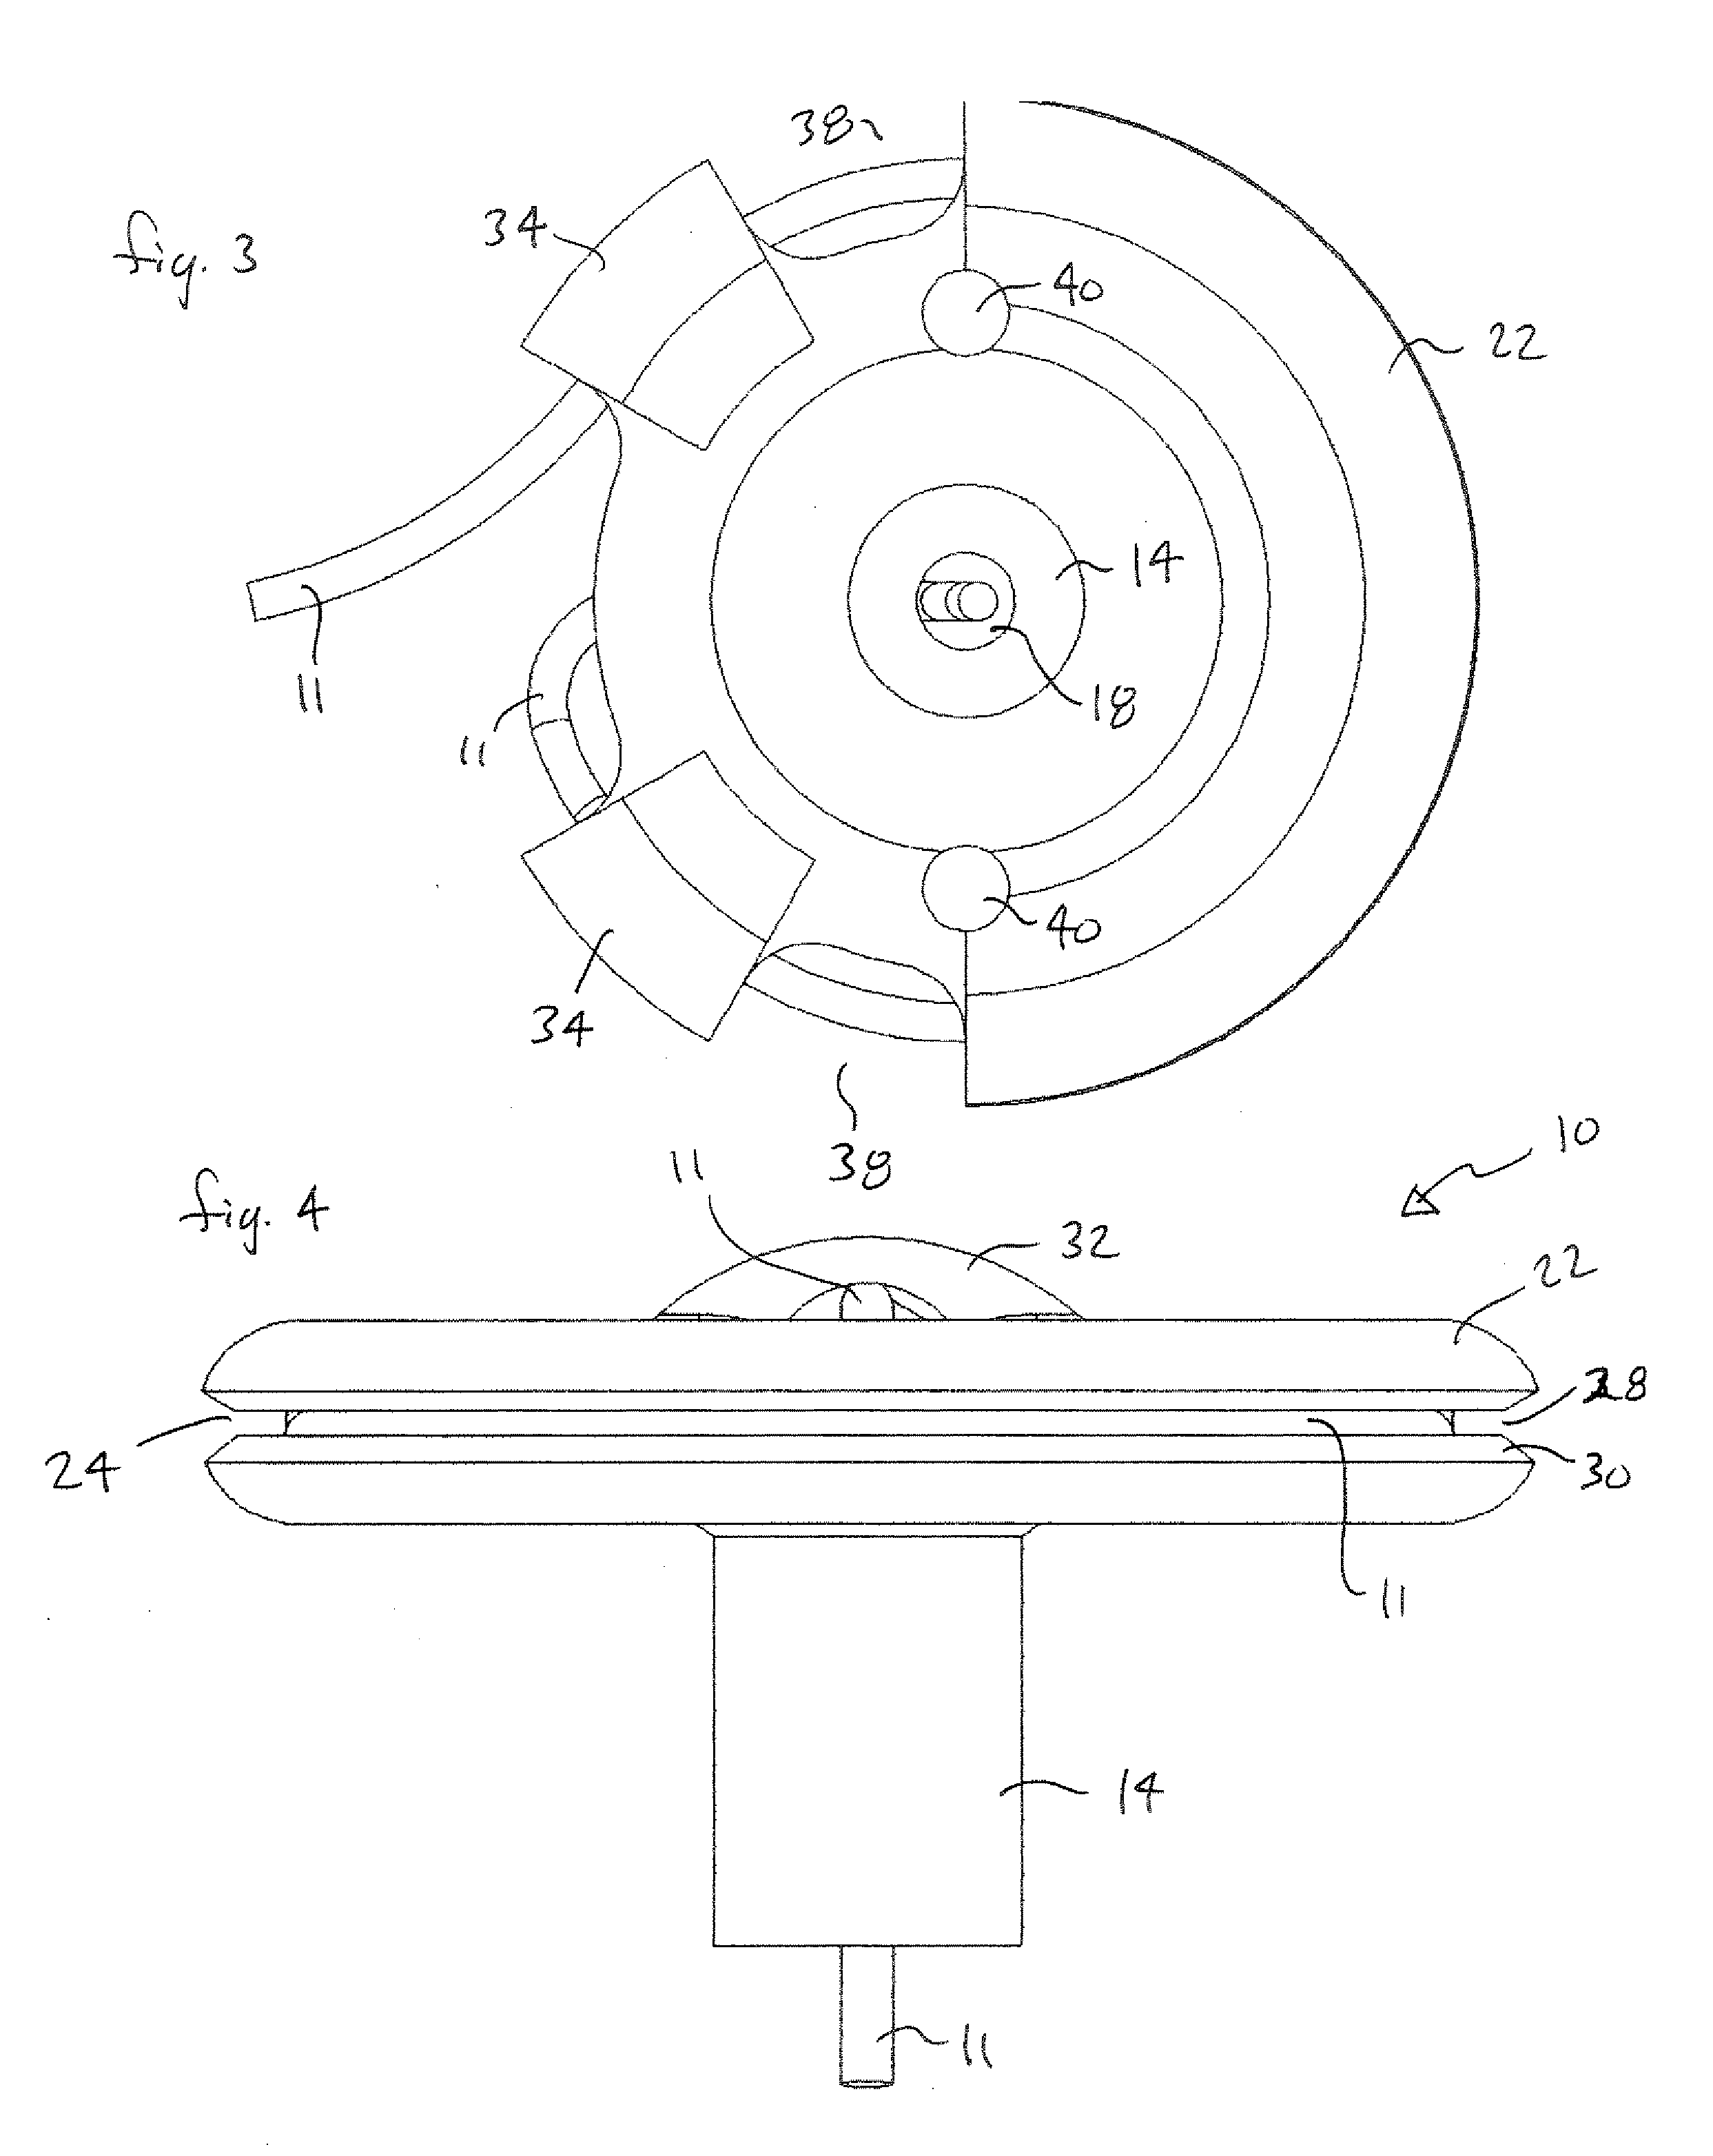 Anchoring device for securing intracranial catheter or lead wire to a patient's skull